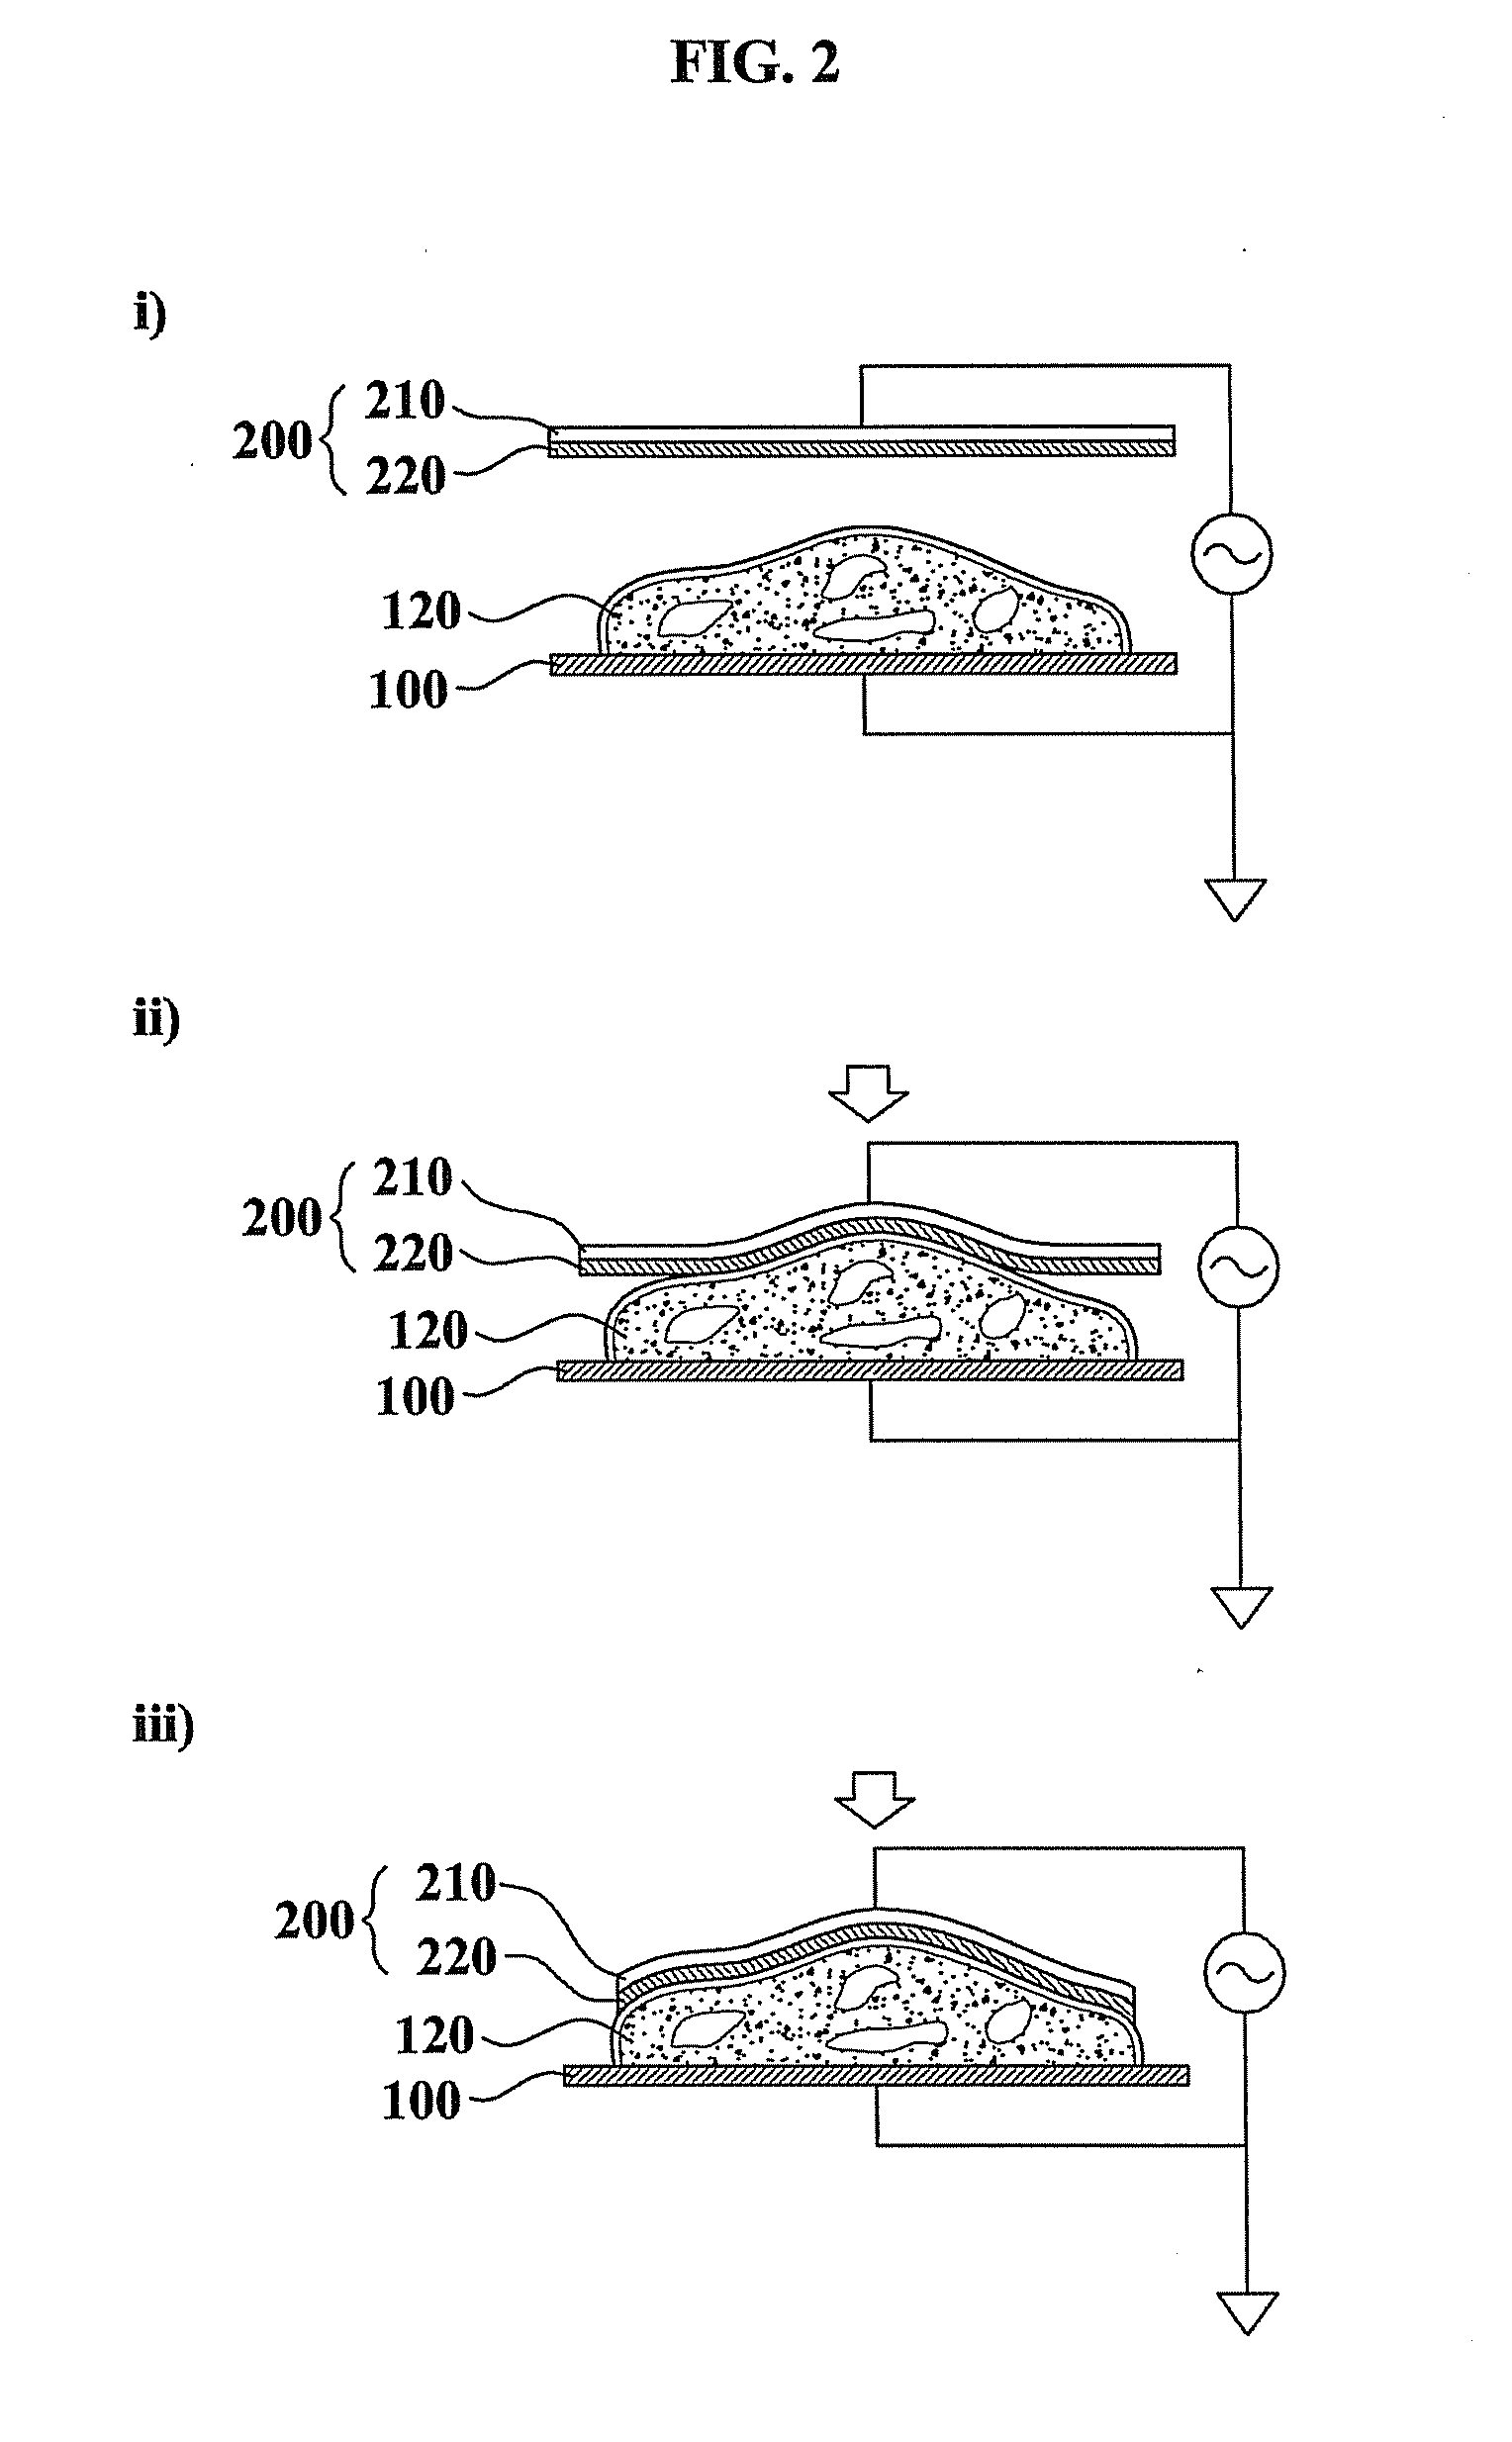 System for maintaining freshness including flexible conducting polymer electrode